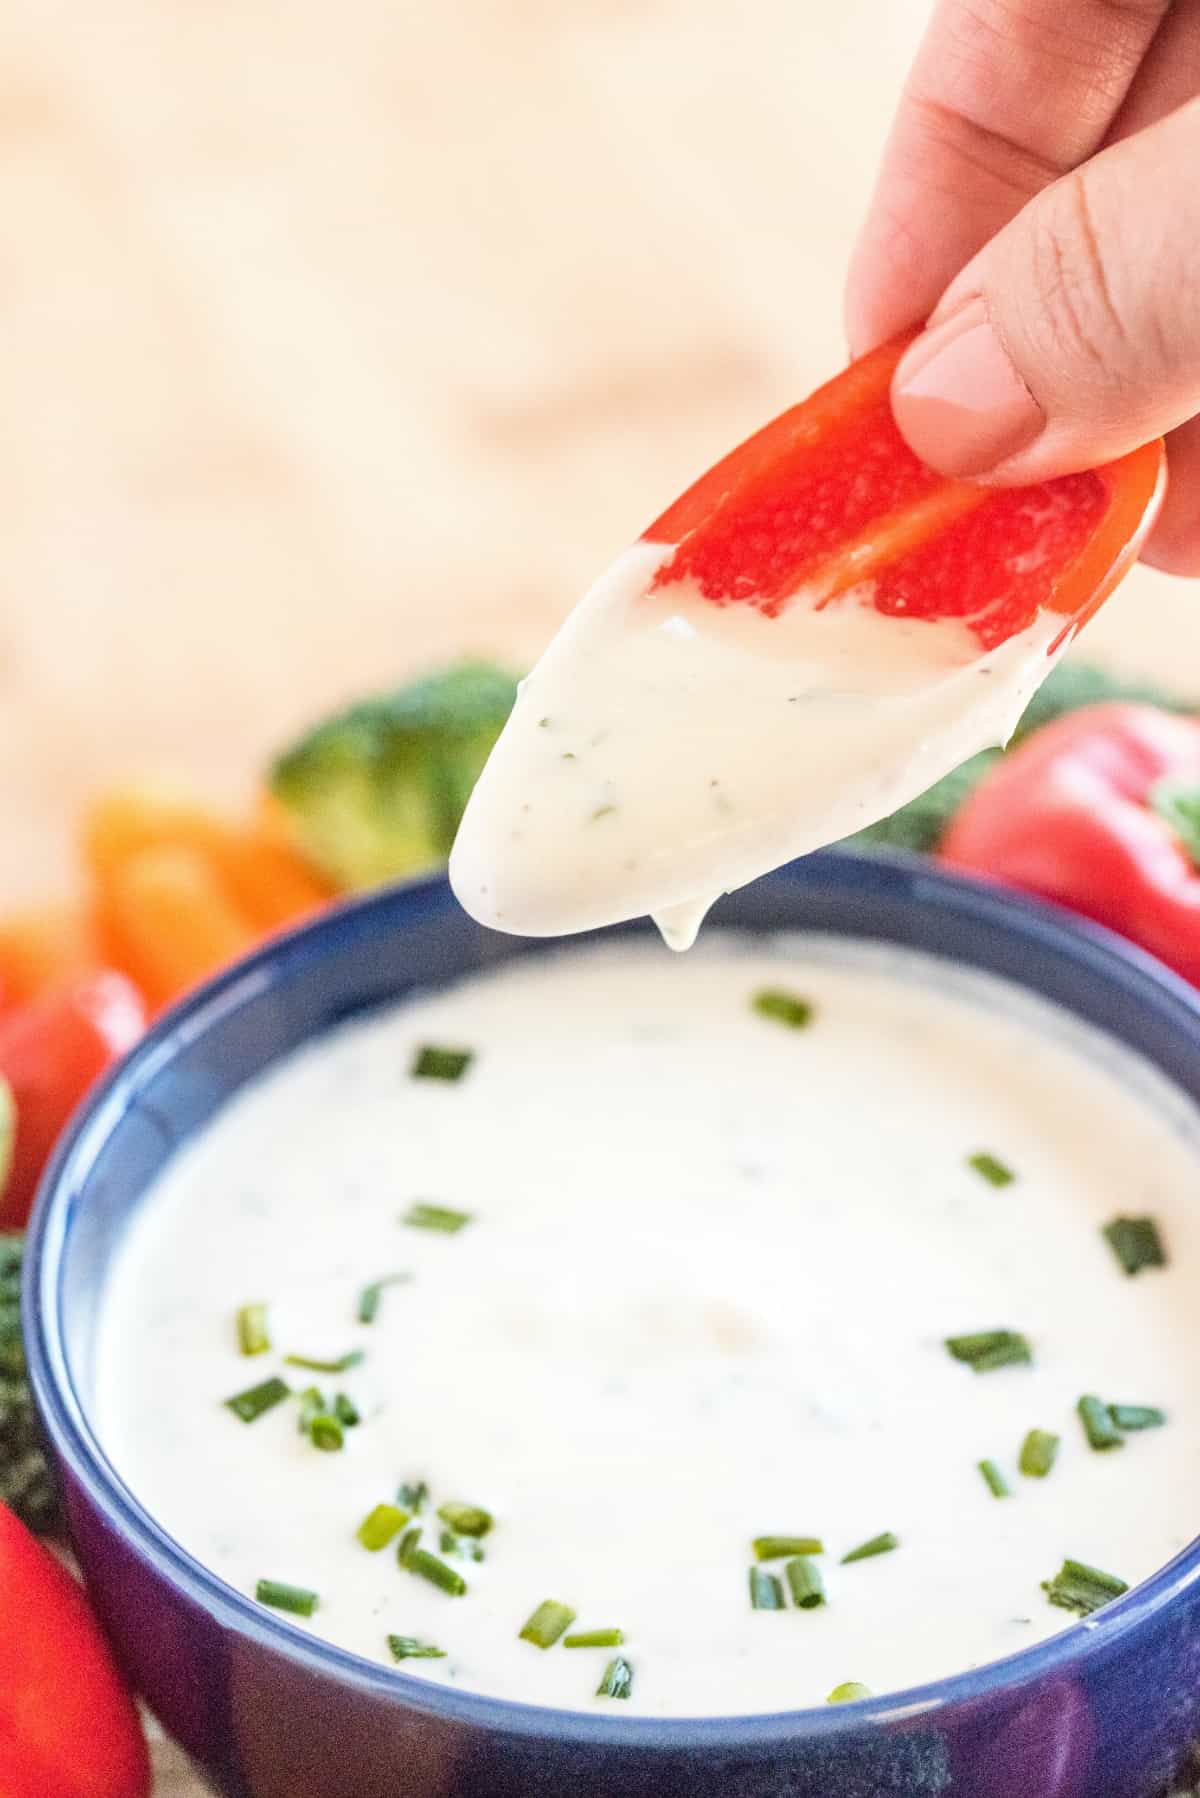 Blue bowl filled with ranch dip and a red pepper being dipped in ranch dressing.